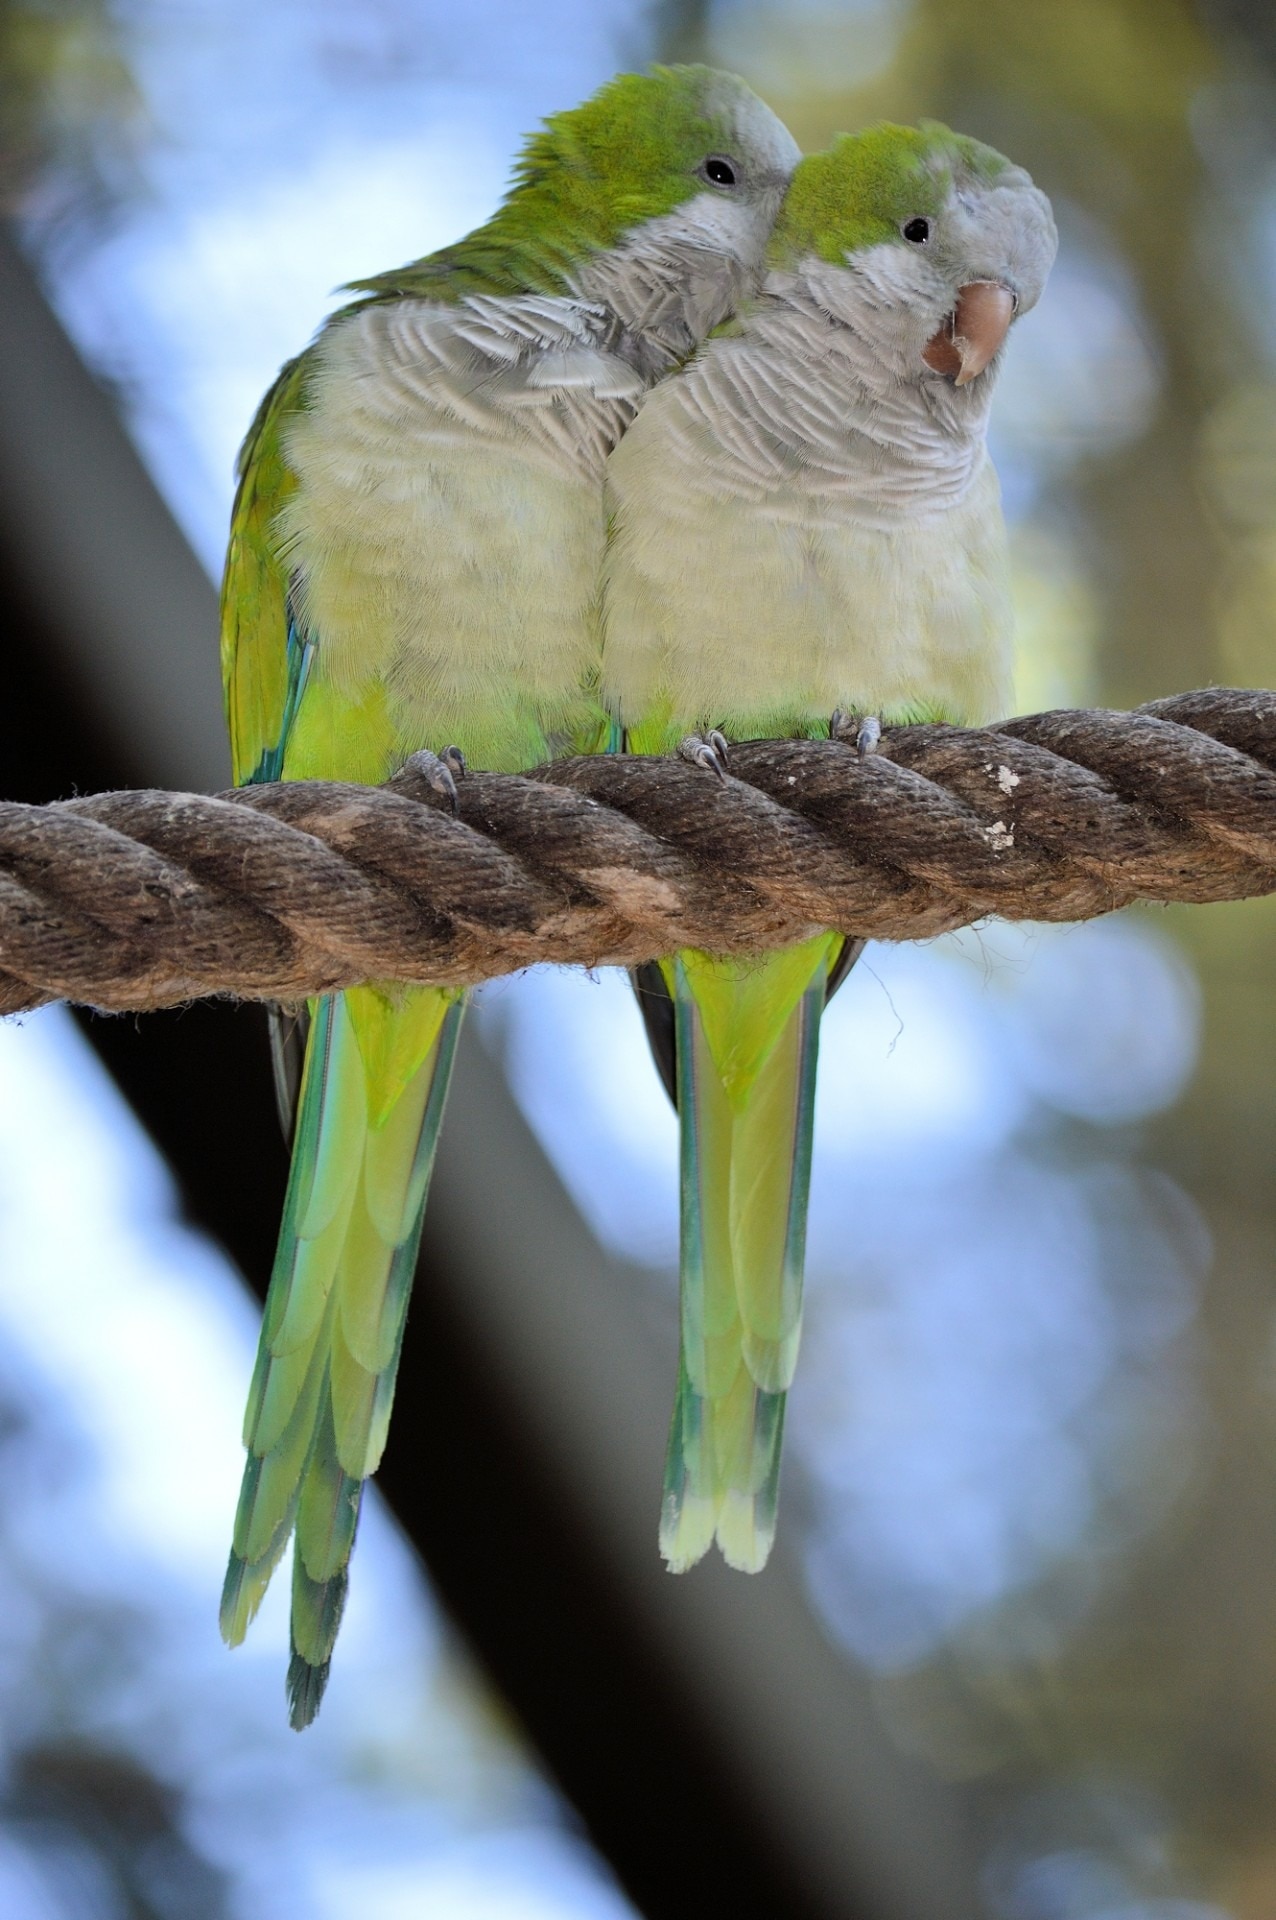 green-and-white birds on rope